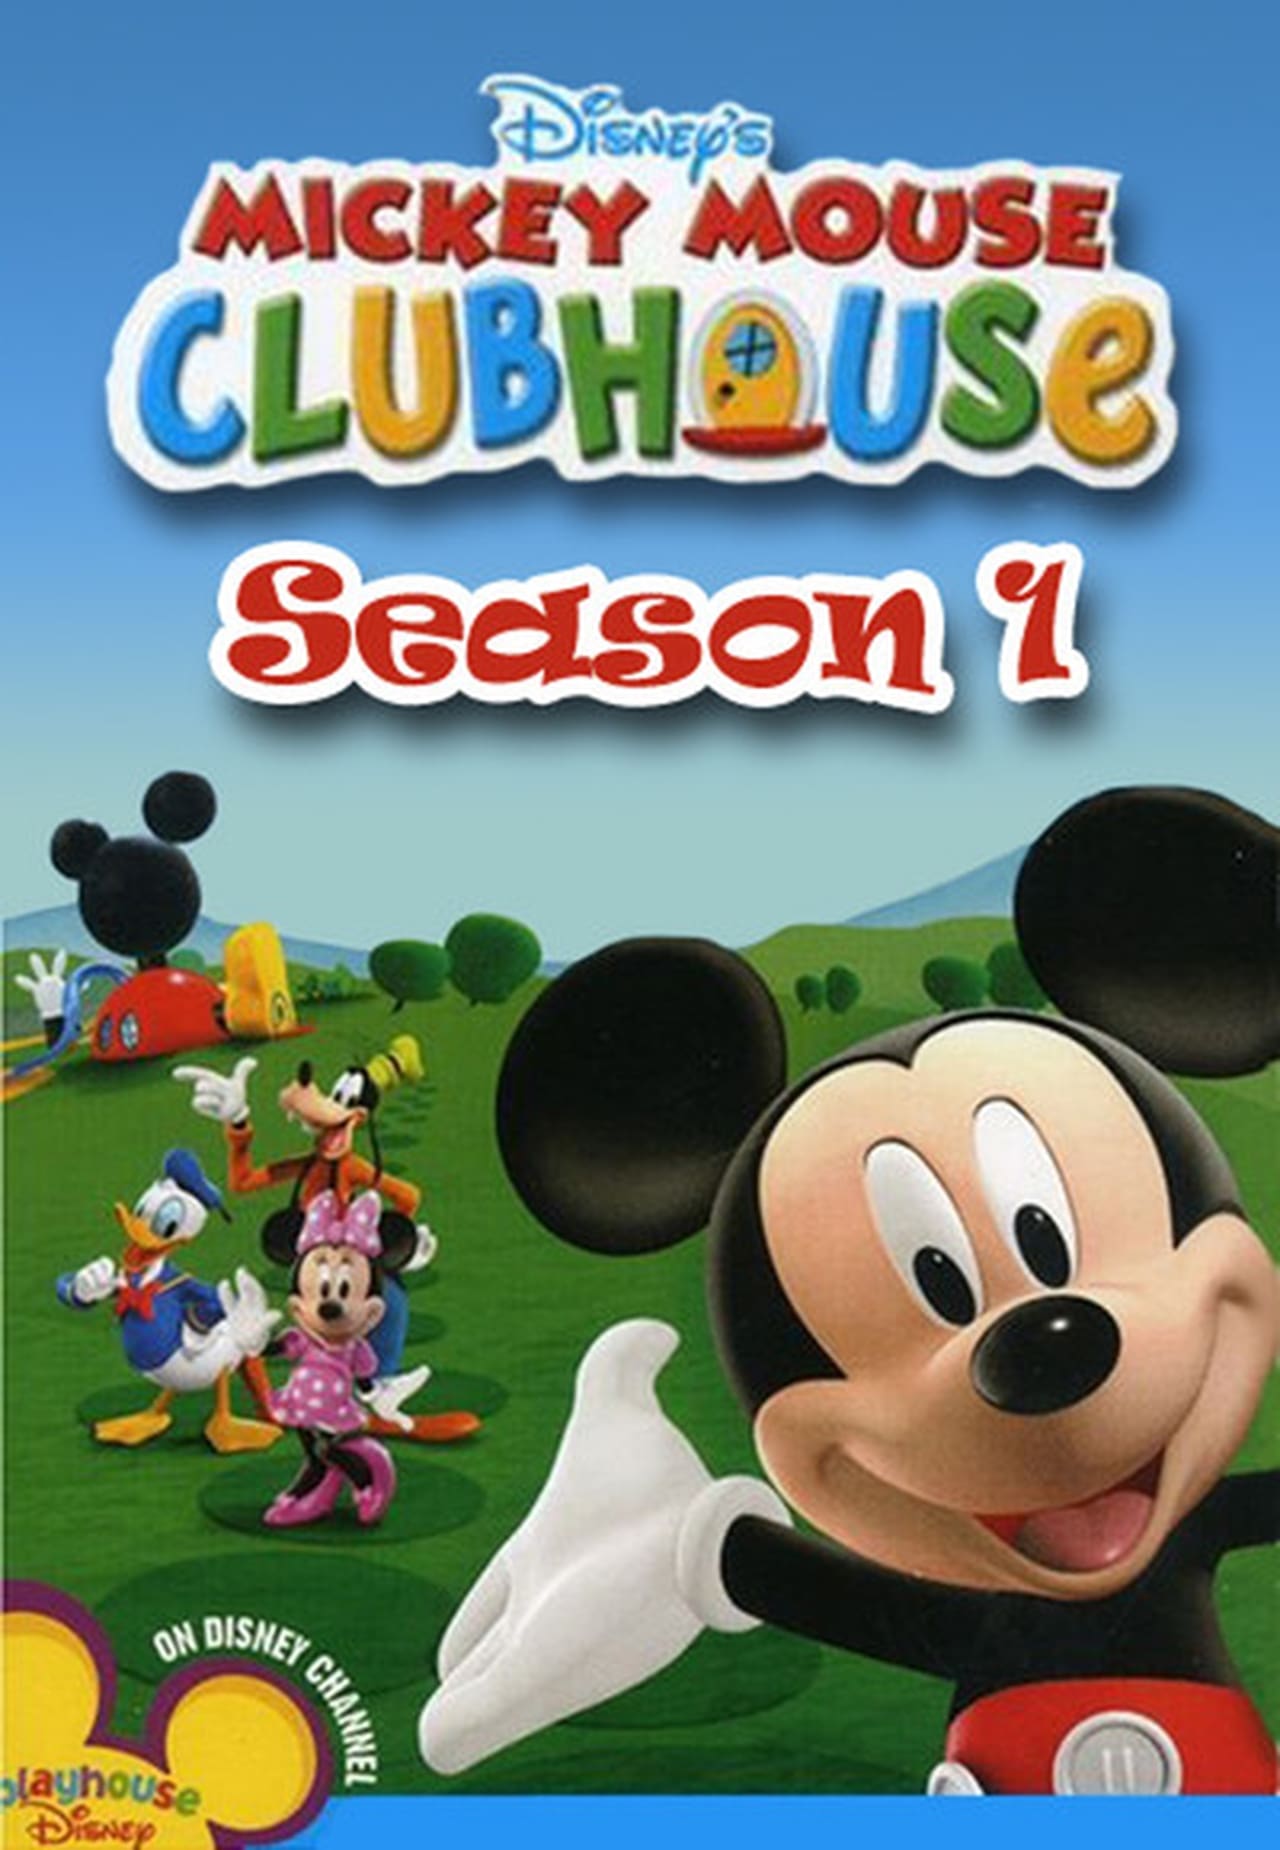 Mickey Mouse Clubhouse Season 1 Watch Full Episodes Free Online At Teatv